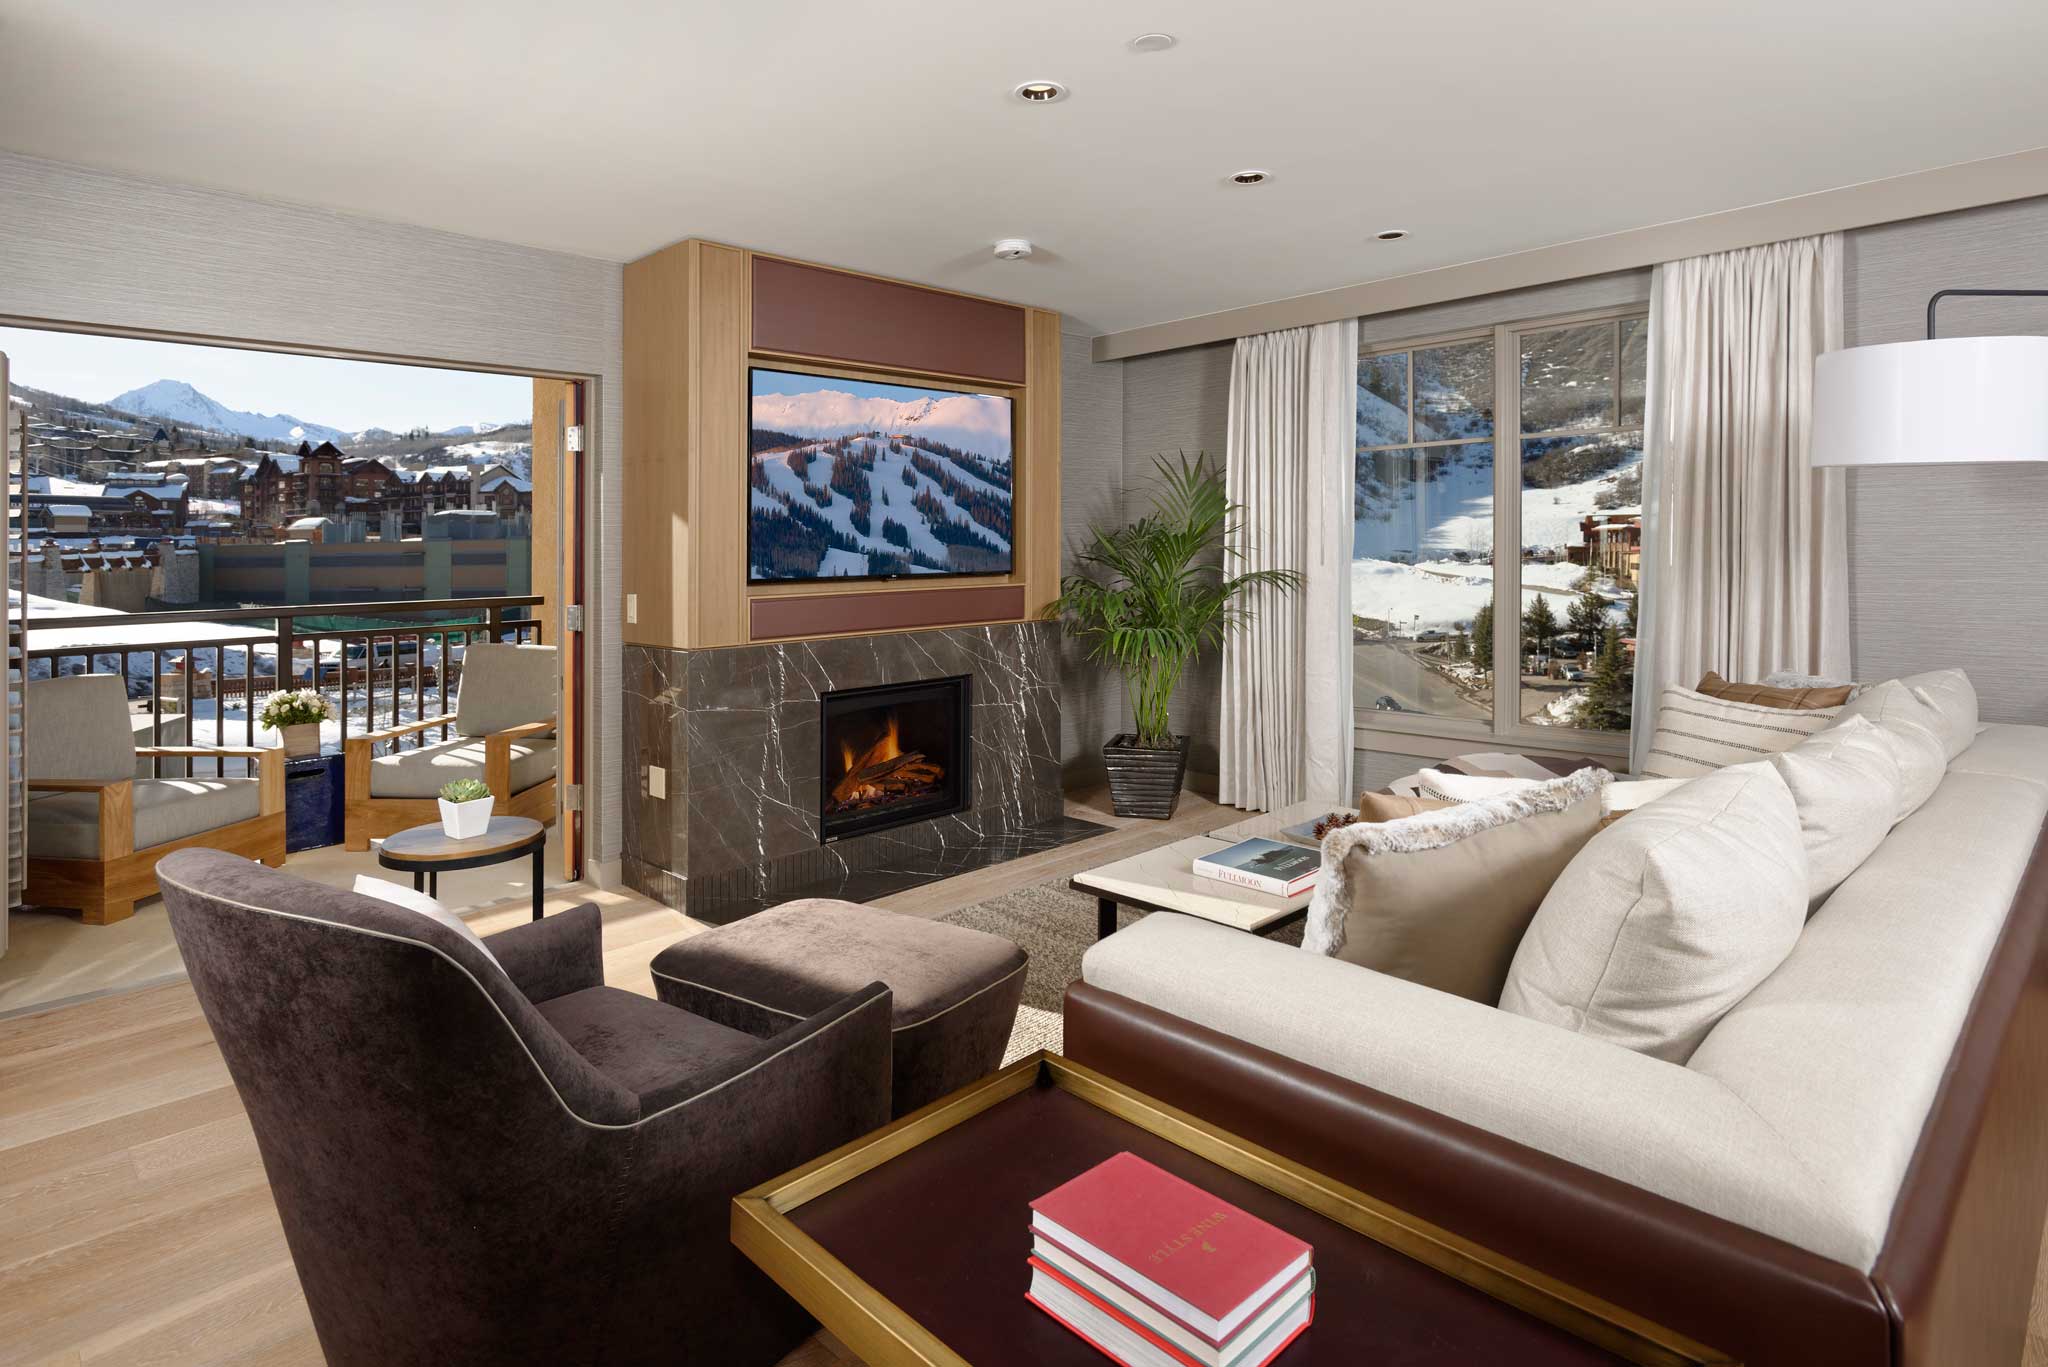 Viceroy Snowmass Penthouse Living Room and Balcony